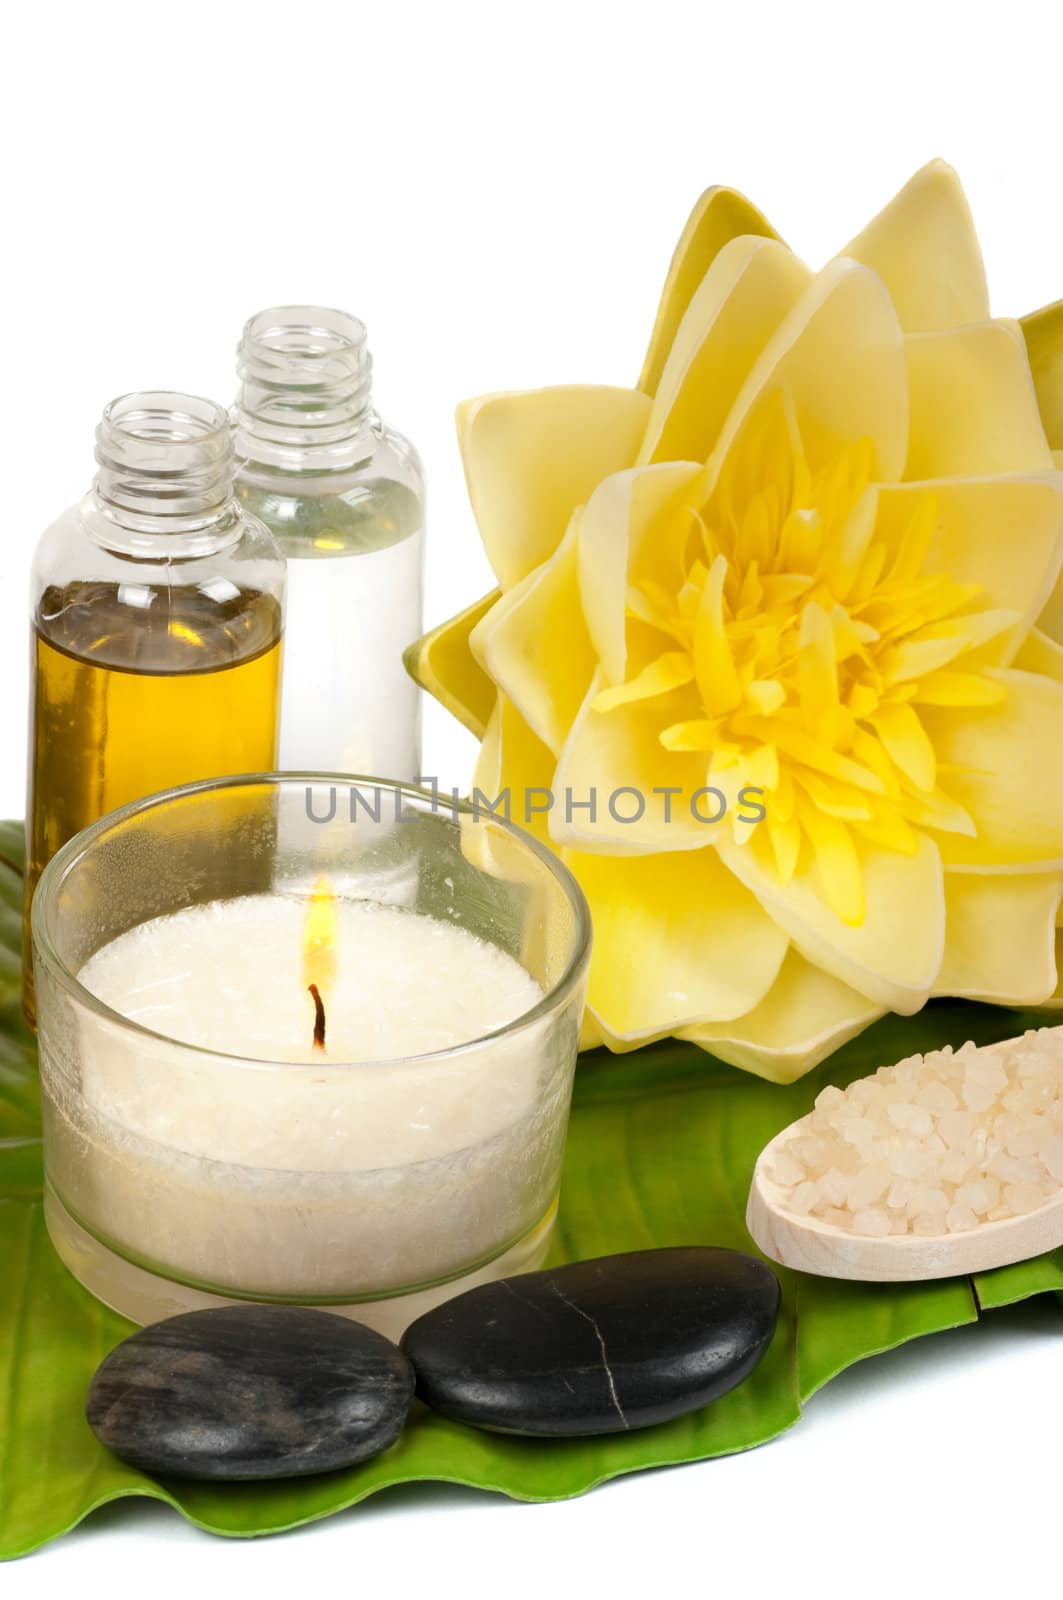 Spa scene with water lily and massage oils